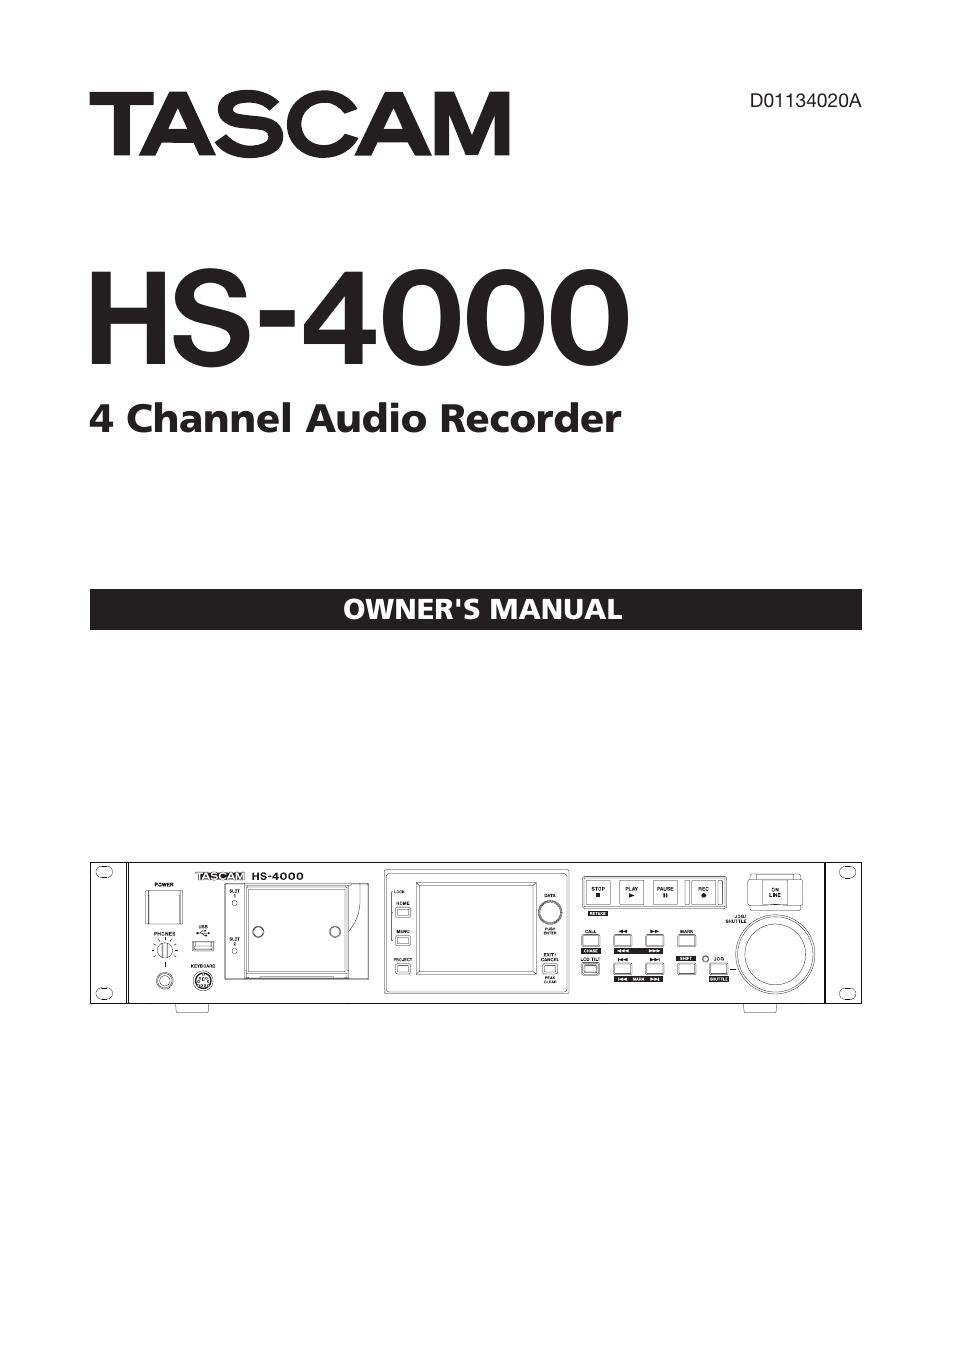 Tascam HS-4000 User Manual | 108 pages